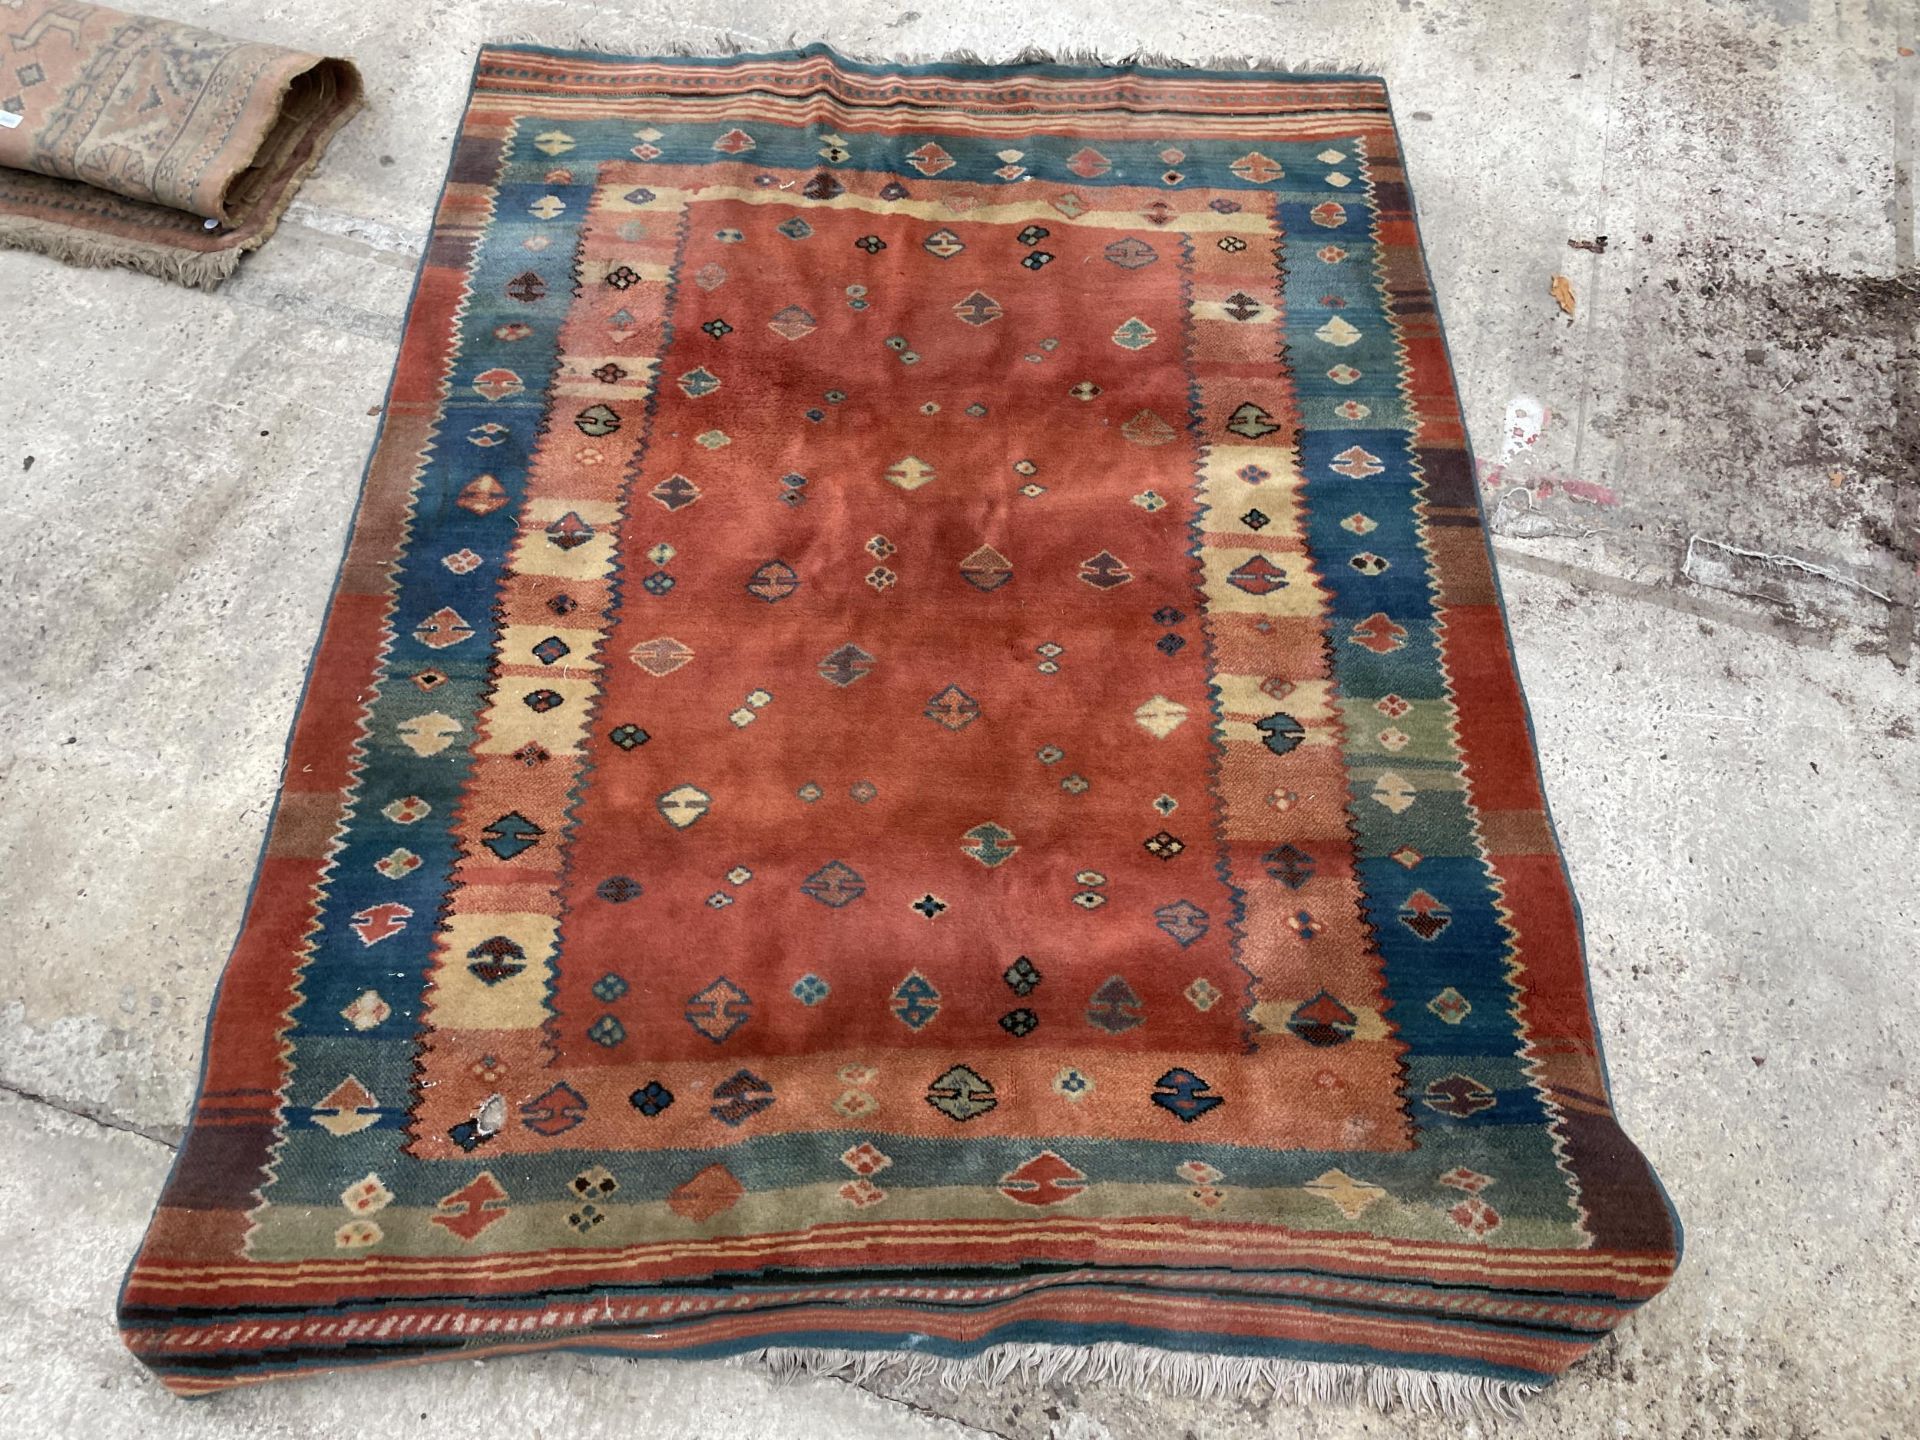 A BLUE AND RED PATTERNED RUG